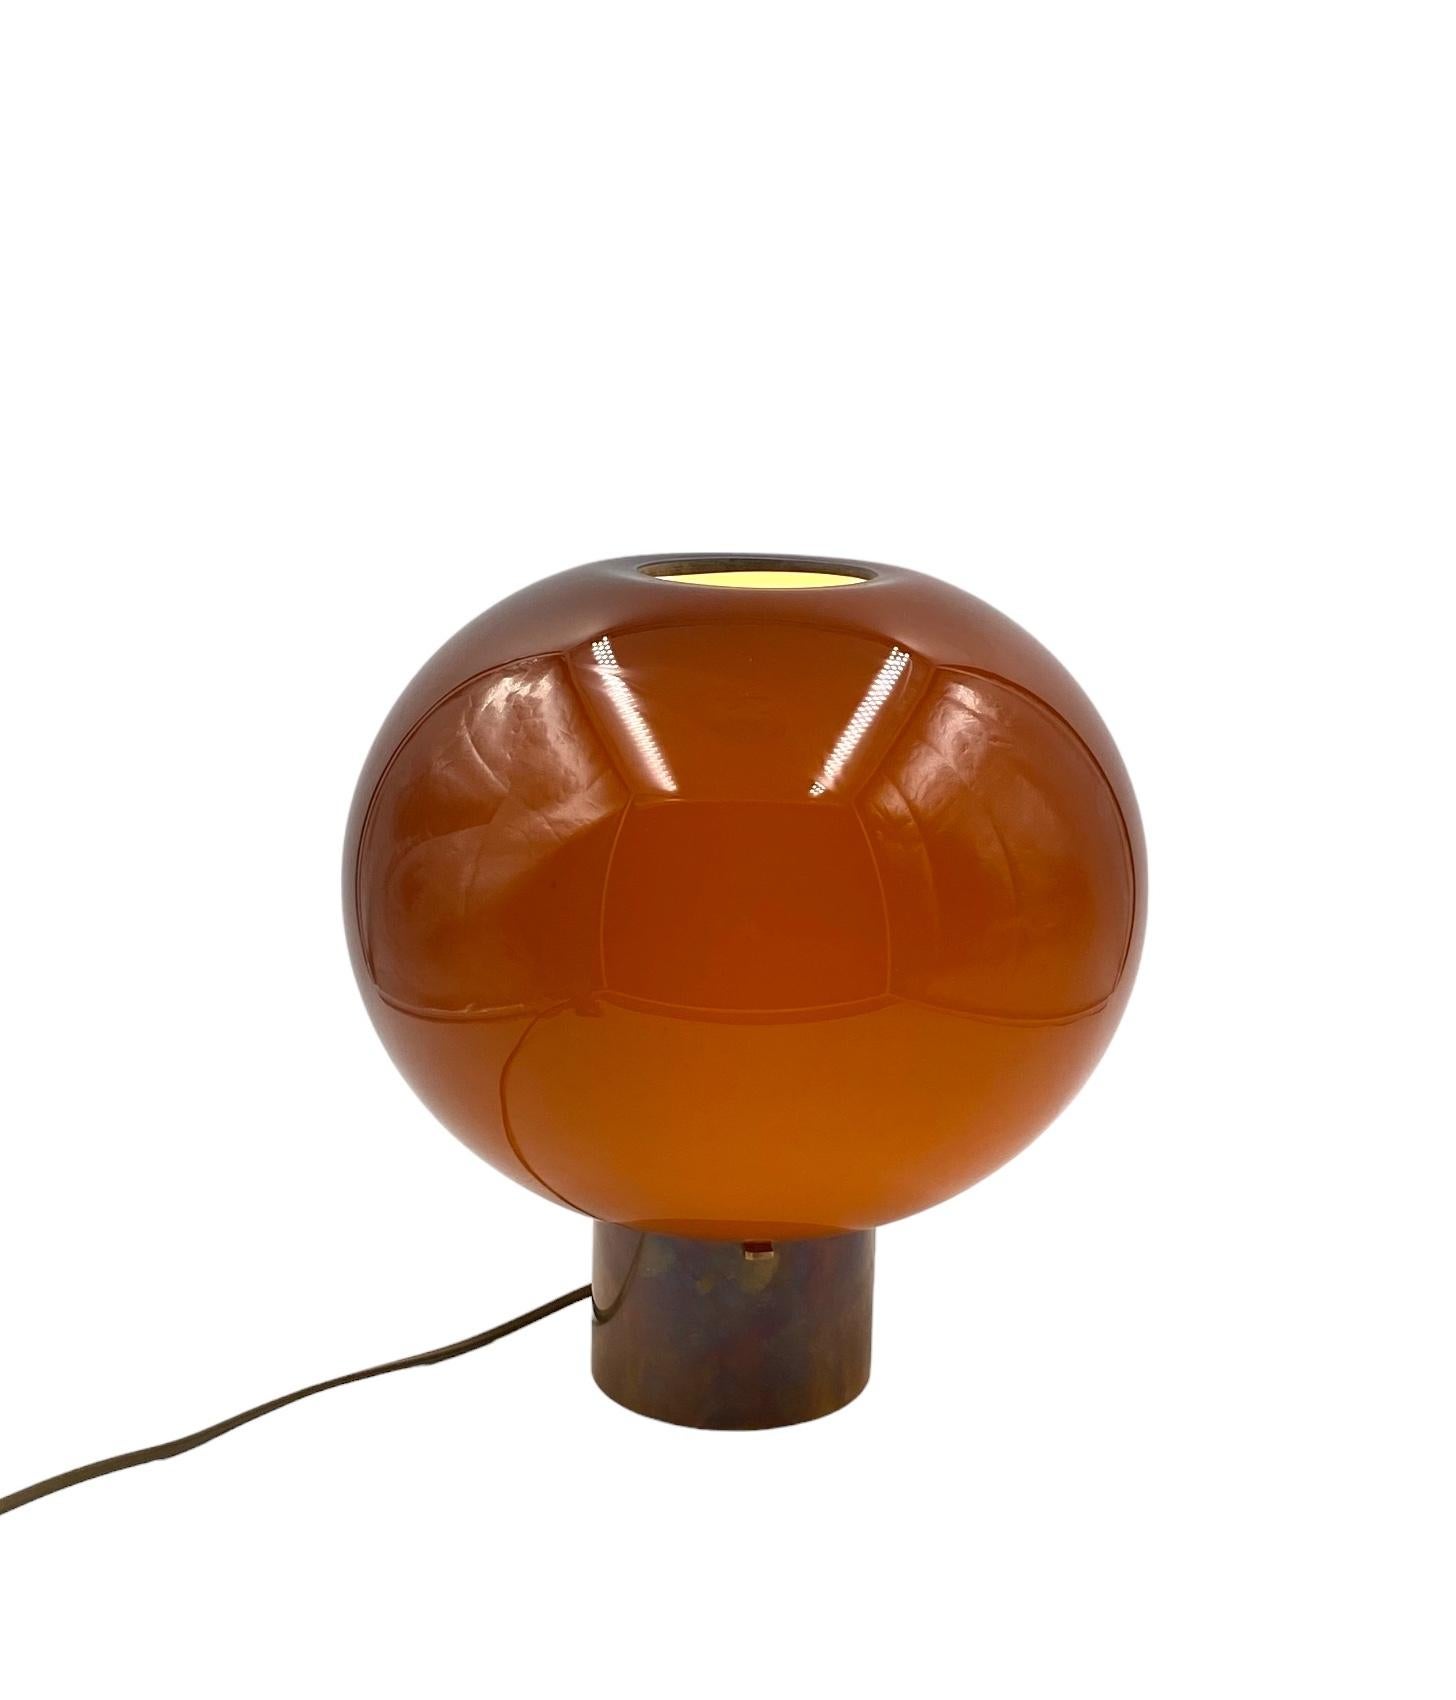 Tabacco brown Murano glass mushroom table lamp, Italy 1980s For Sale 10